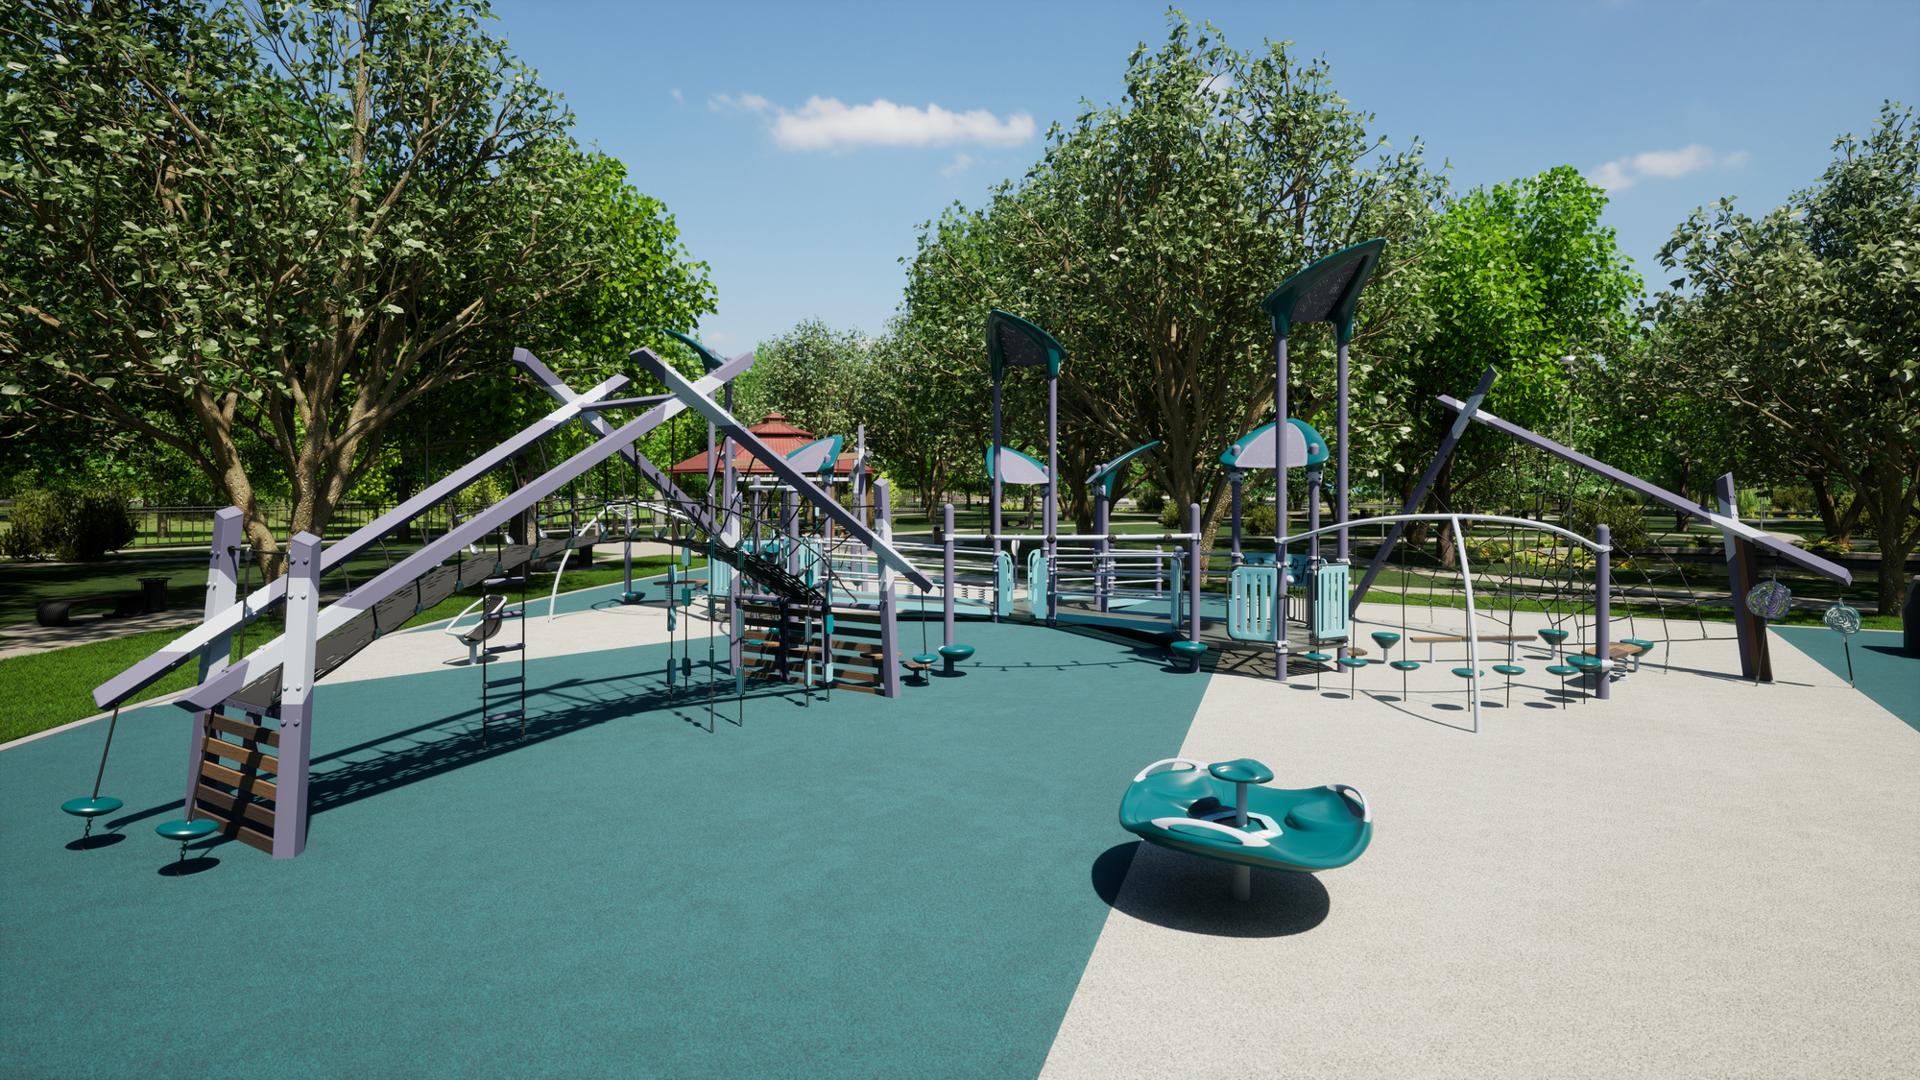 Central Grounds Play Area – Landscape Structures